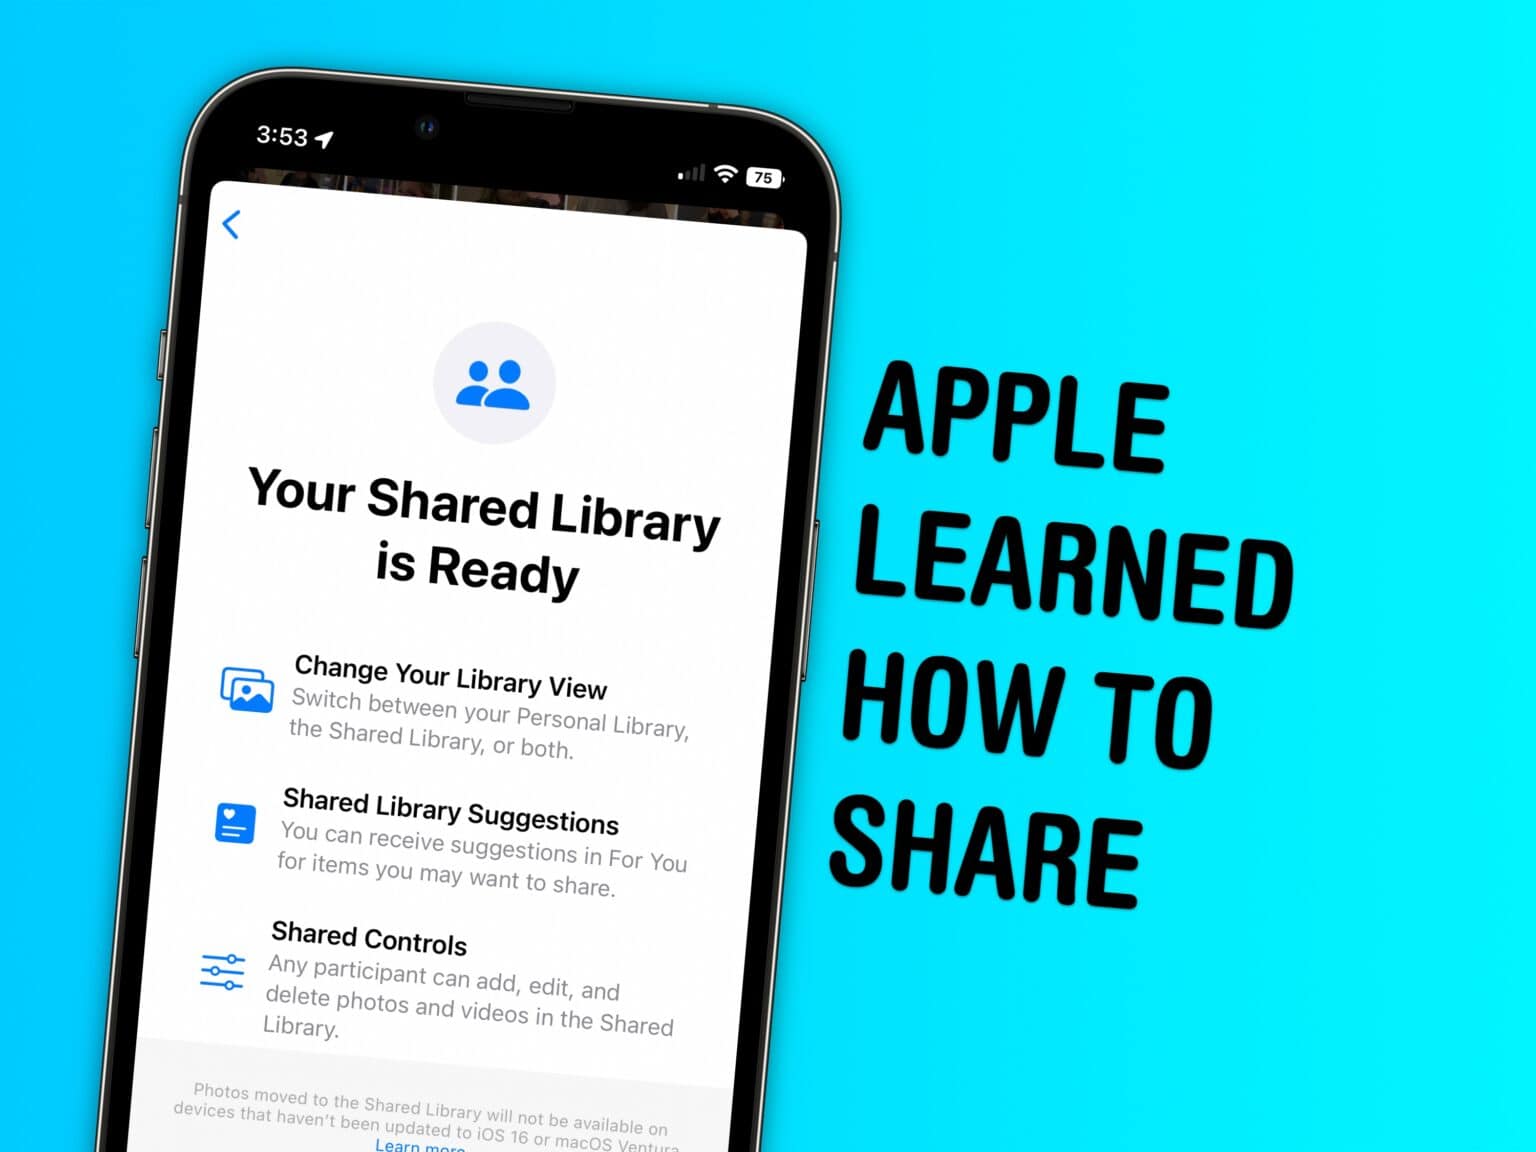 Apple learned how to share!